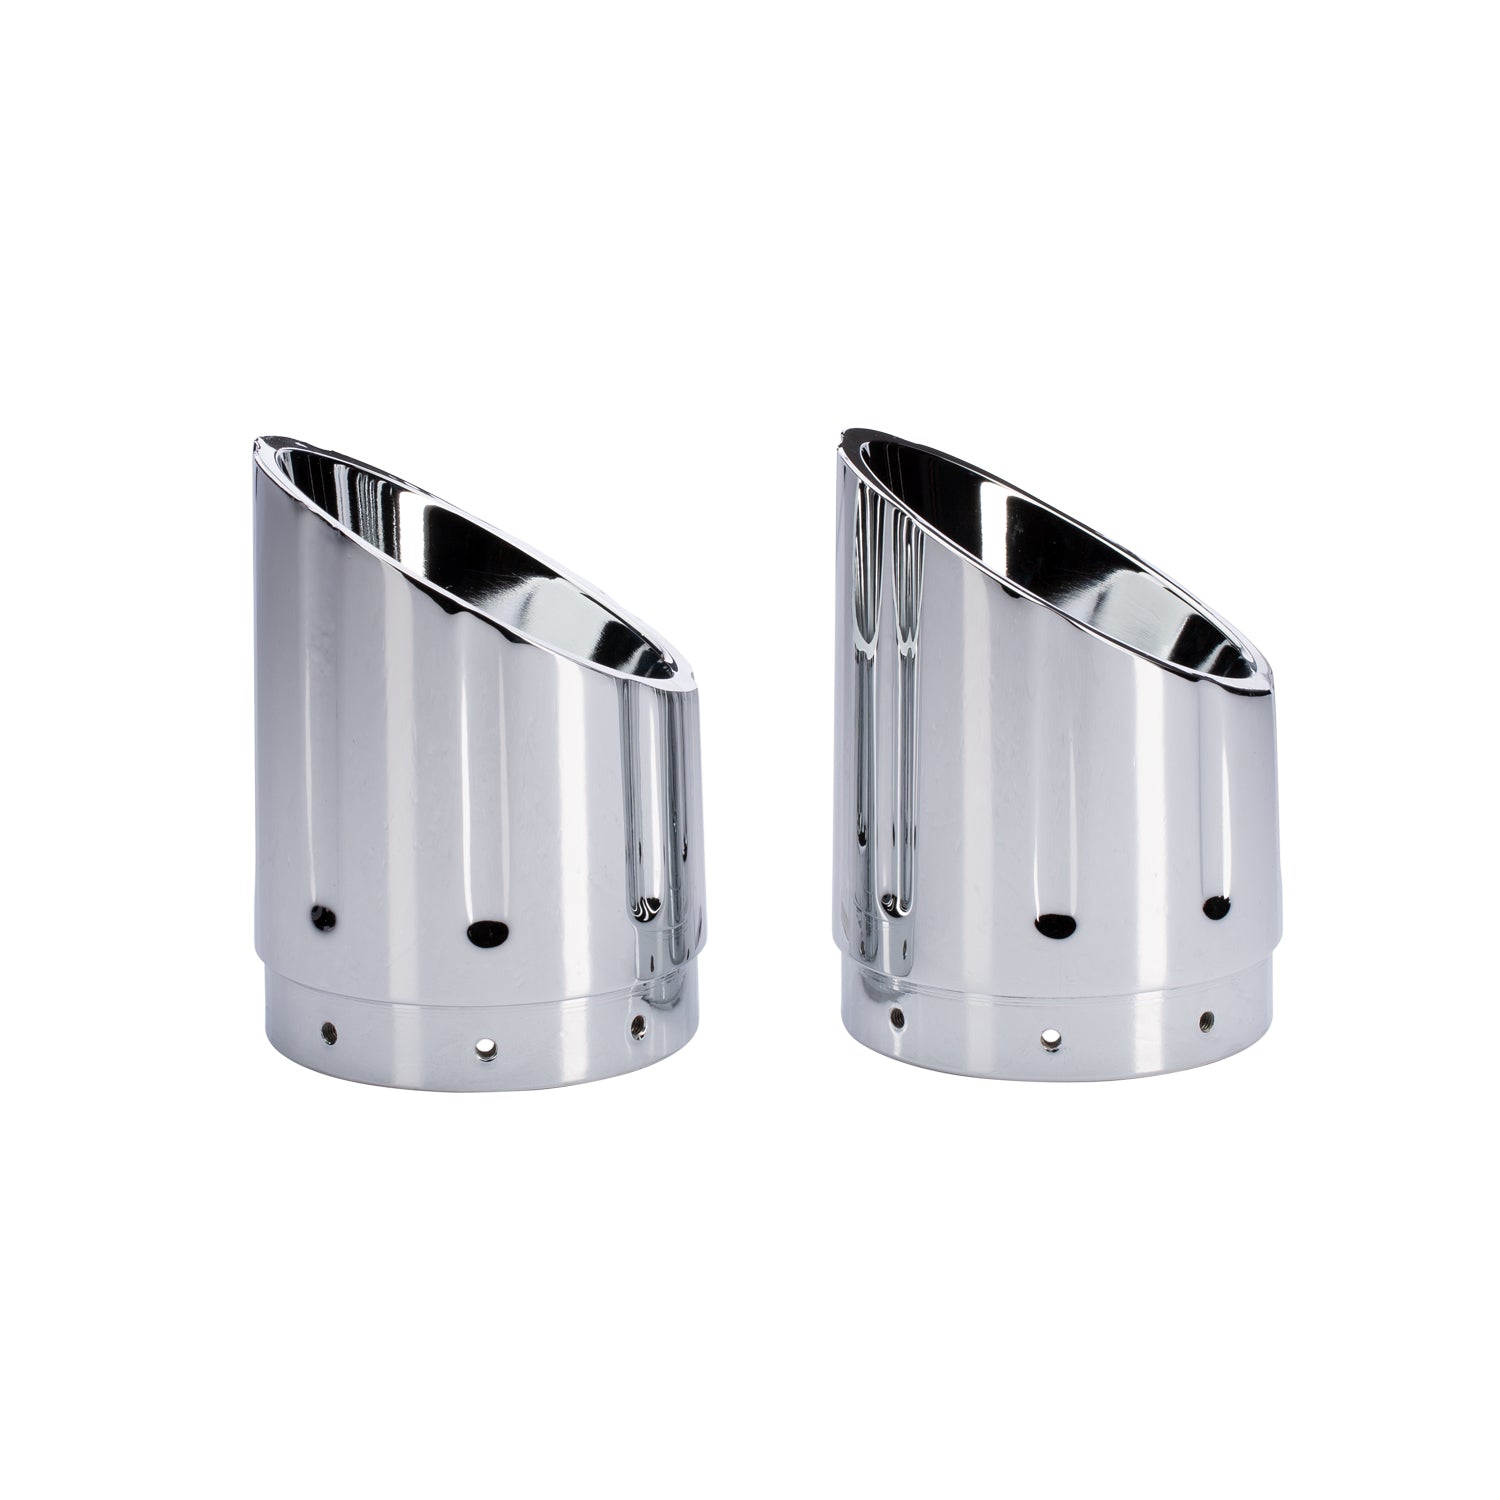 Six Shooter Exhaust Tips in Chrome, Pair